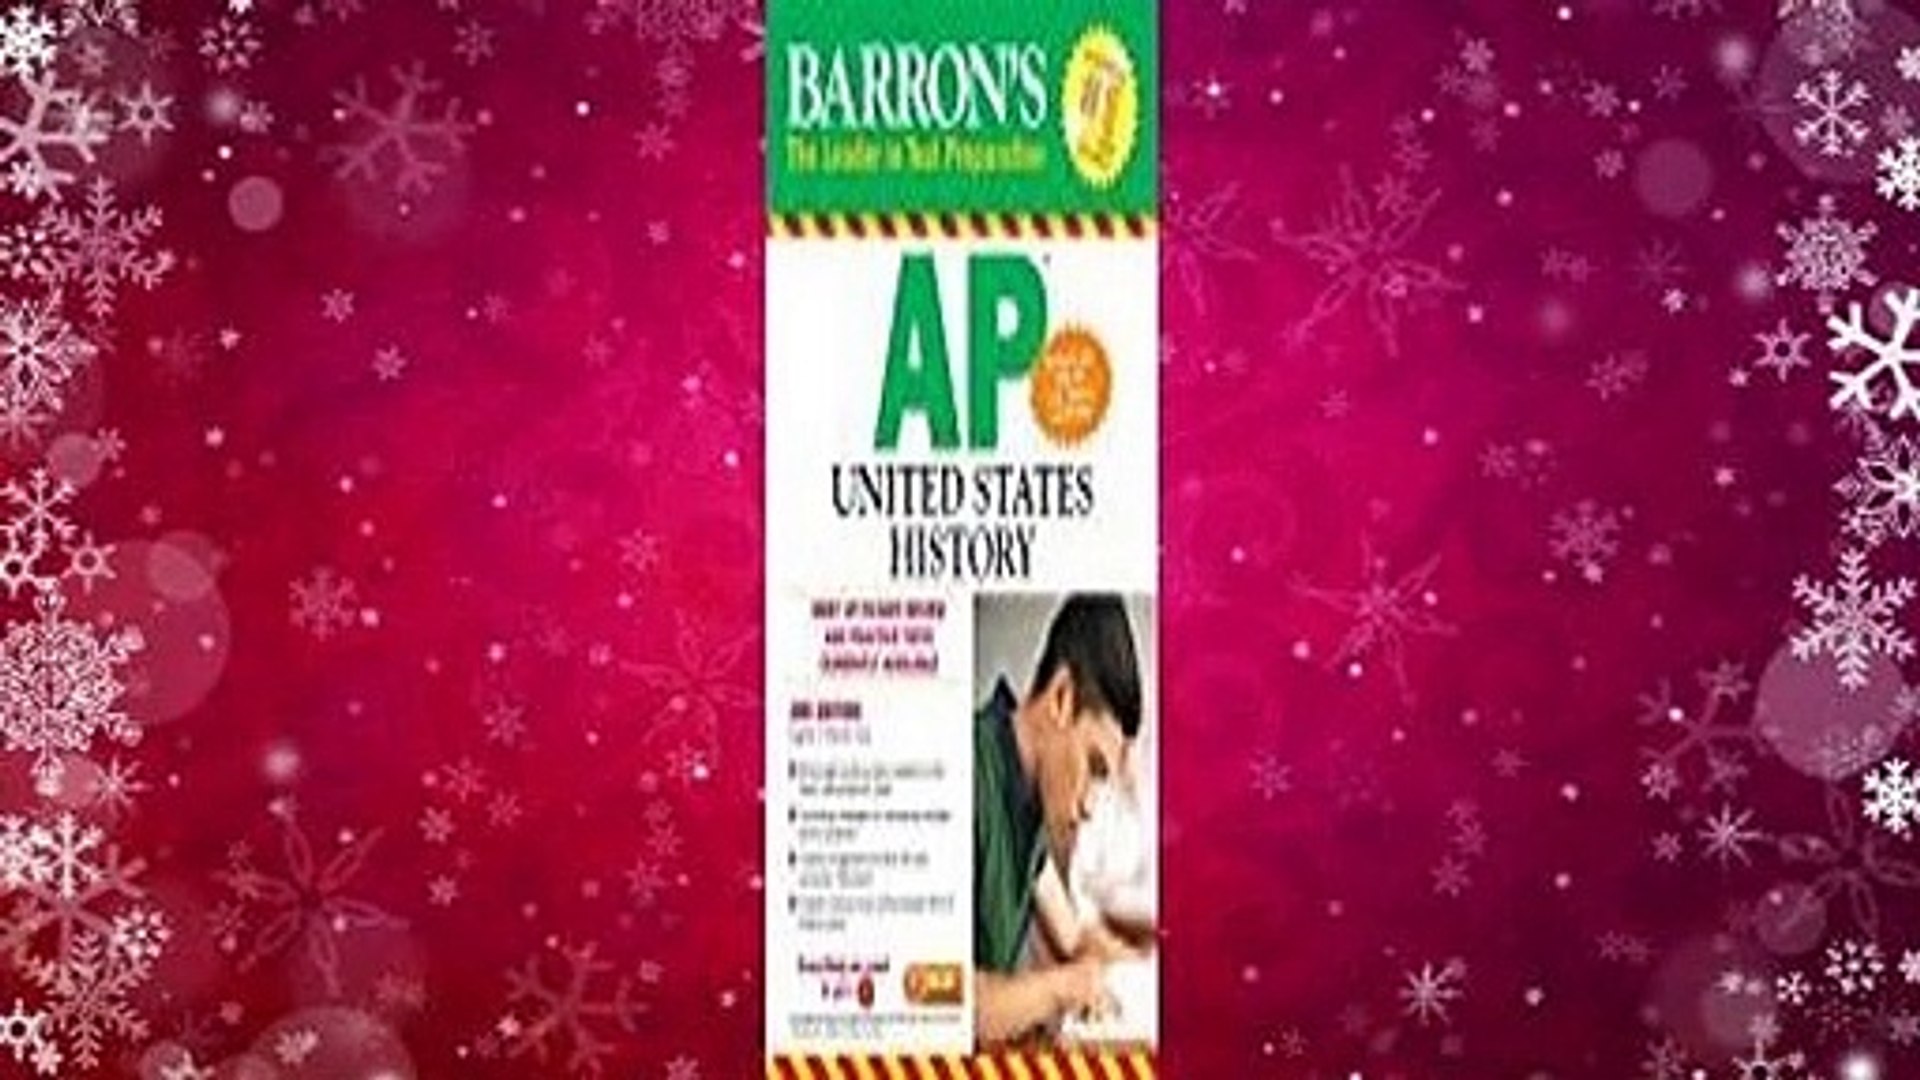 Barron's AP United States History Complete is the perfect resource for students who want to learn ab